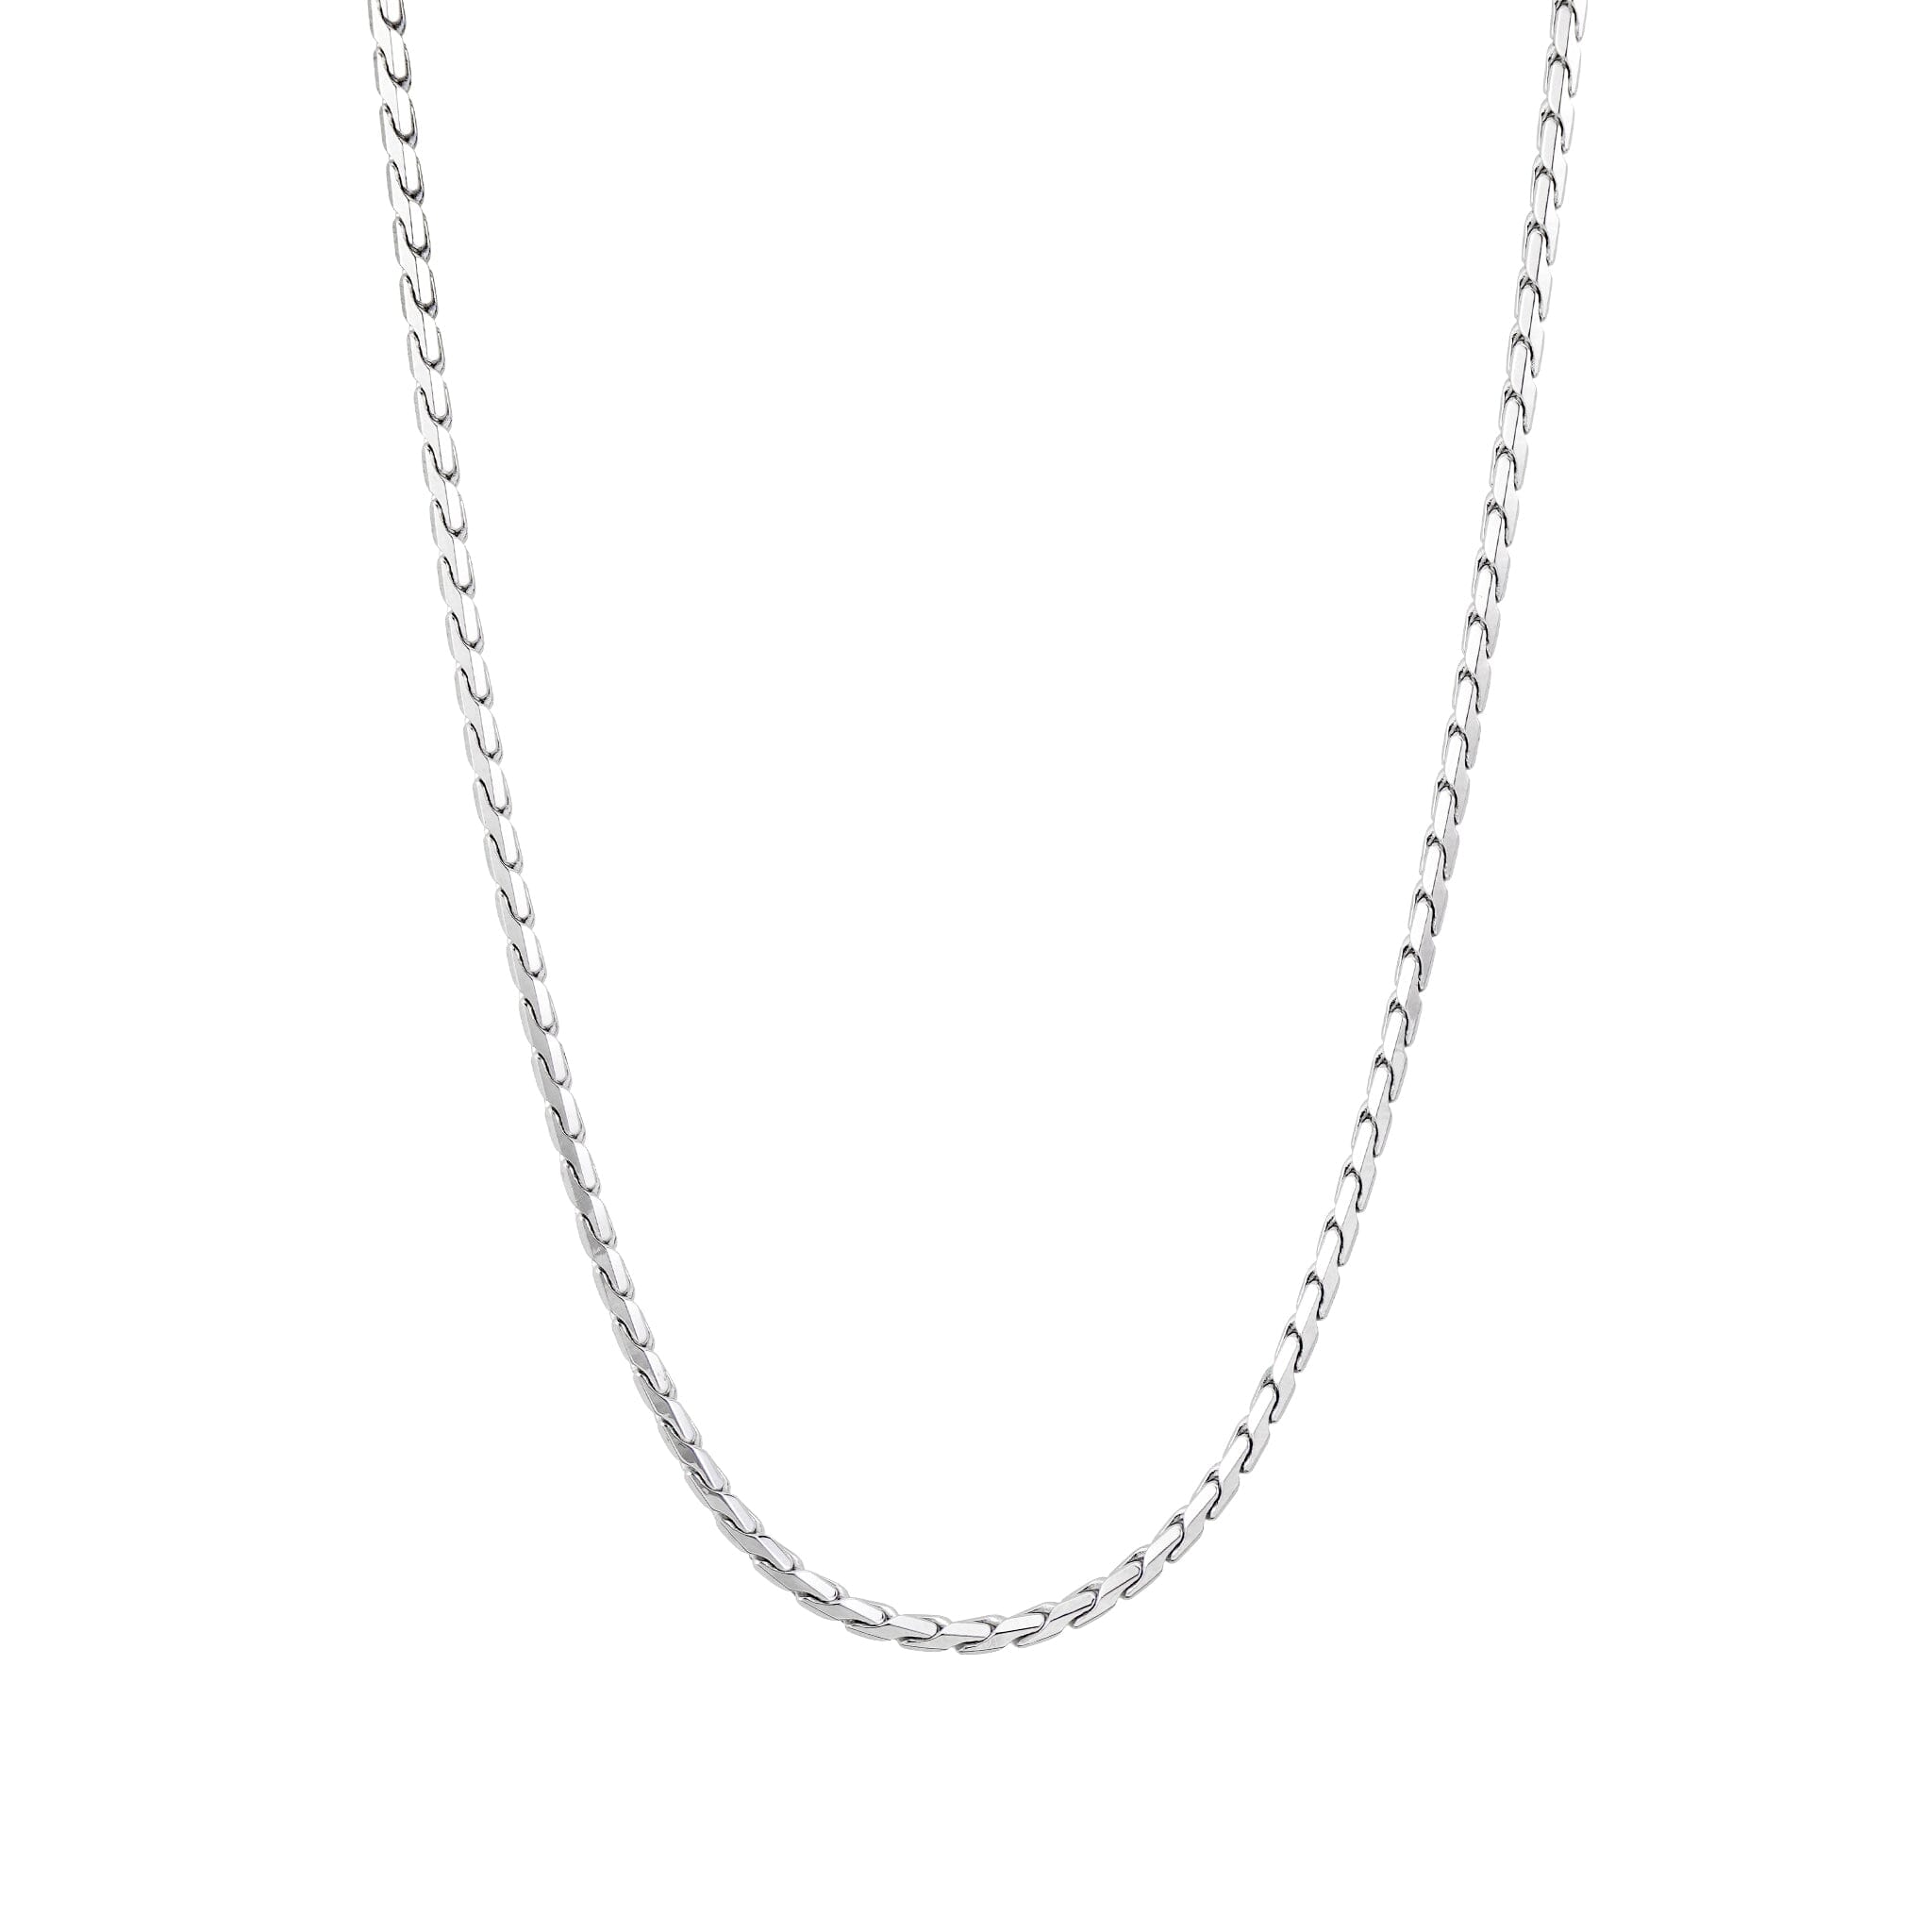 Men's Sterling Silver Chain Necklace with Sapphire Clasp Chains WAA FASHION GROUP 